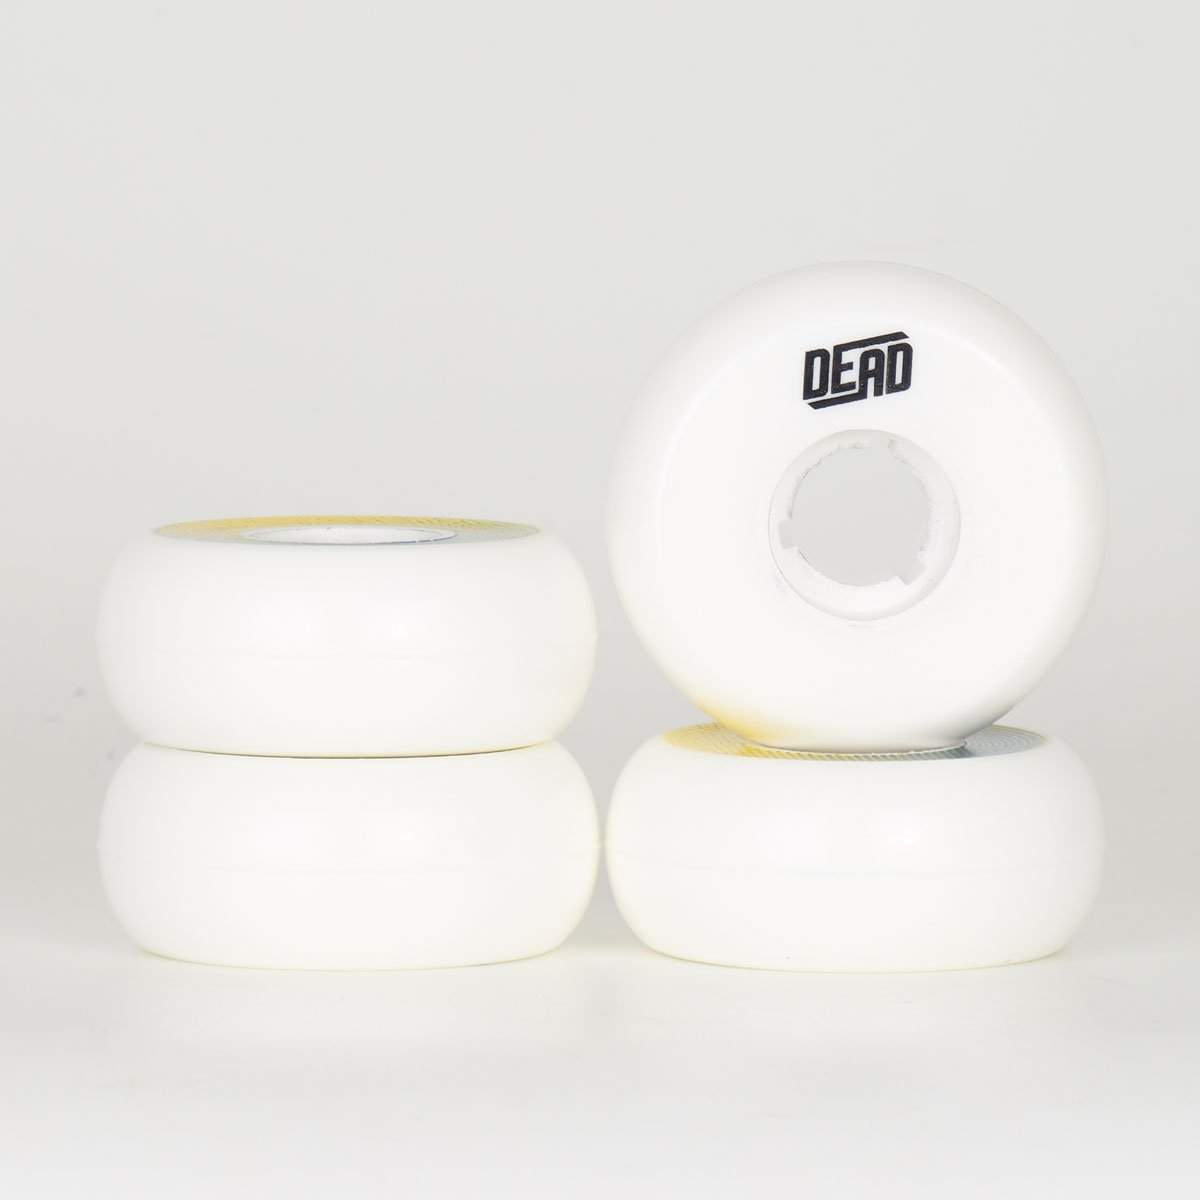 Dead 58mm / 88A White Gradient Wheels-Dead-58mm,Aggressive Skate,atcUpsellCol:upsellwheels,Bemag,green,Skate Parts,Wheels,white,yellow